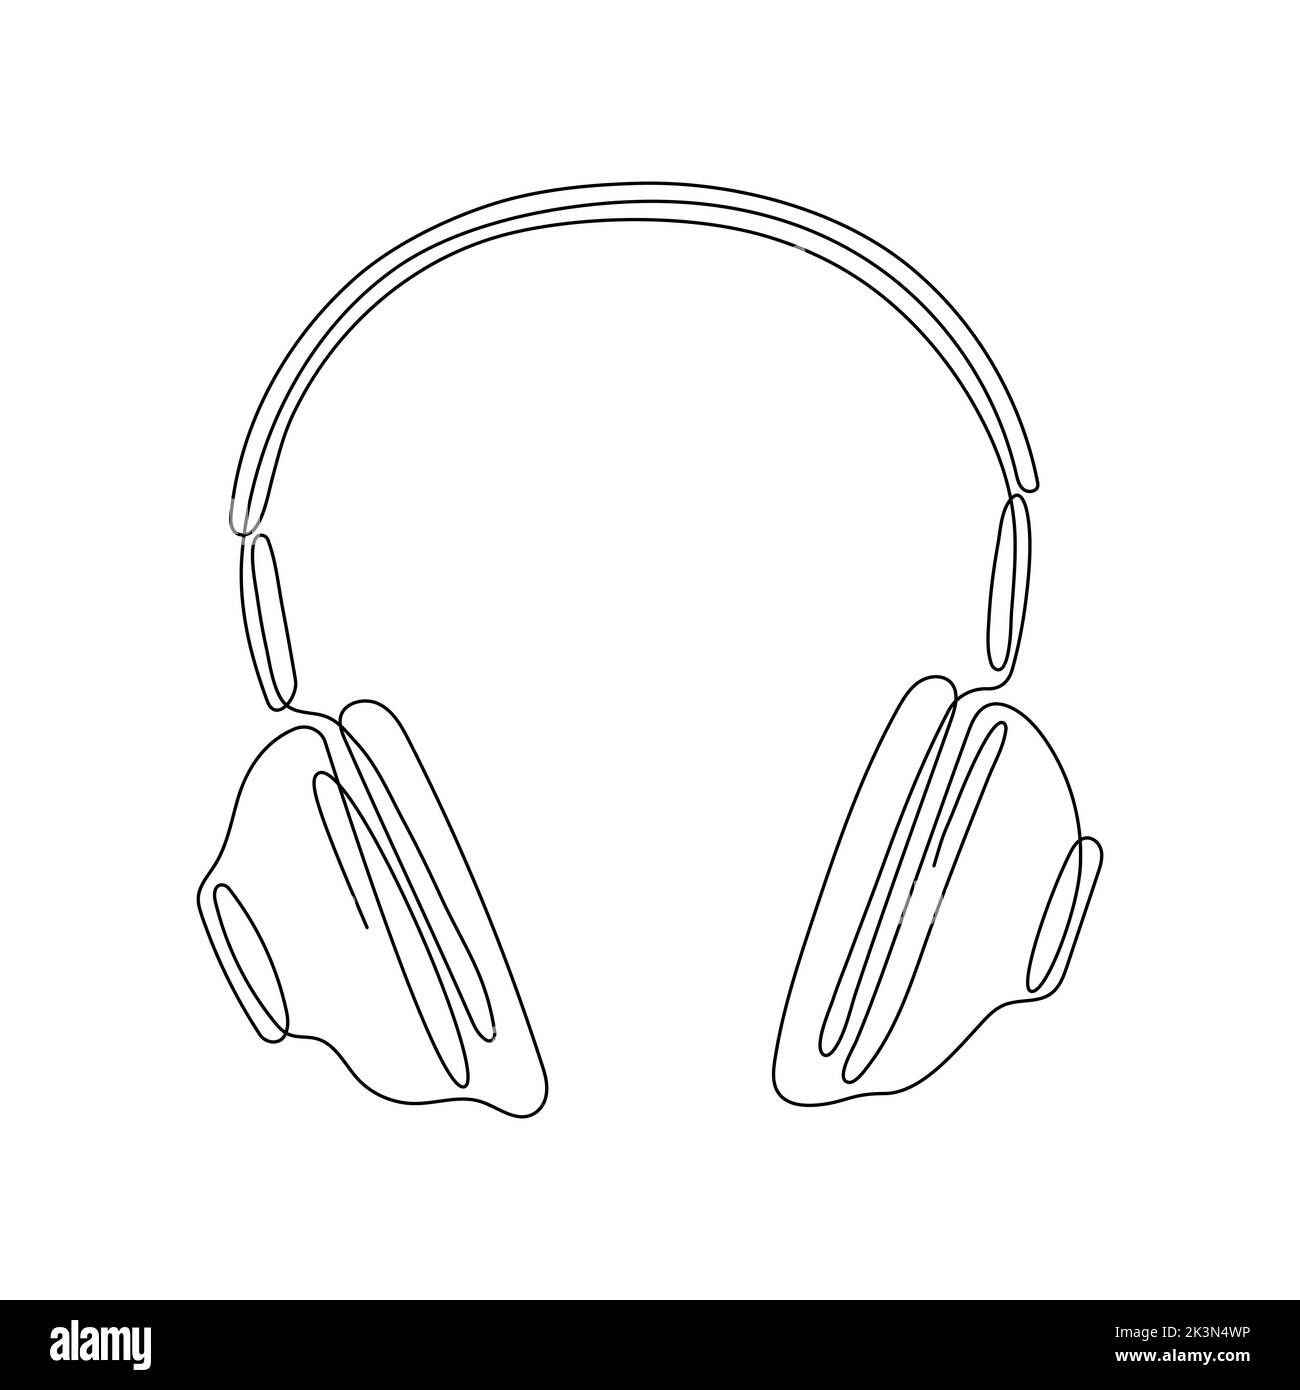 Headphones continuous line art. Hand drawing music gadget symbol. Vector isolated on white. Stock Vector